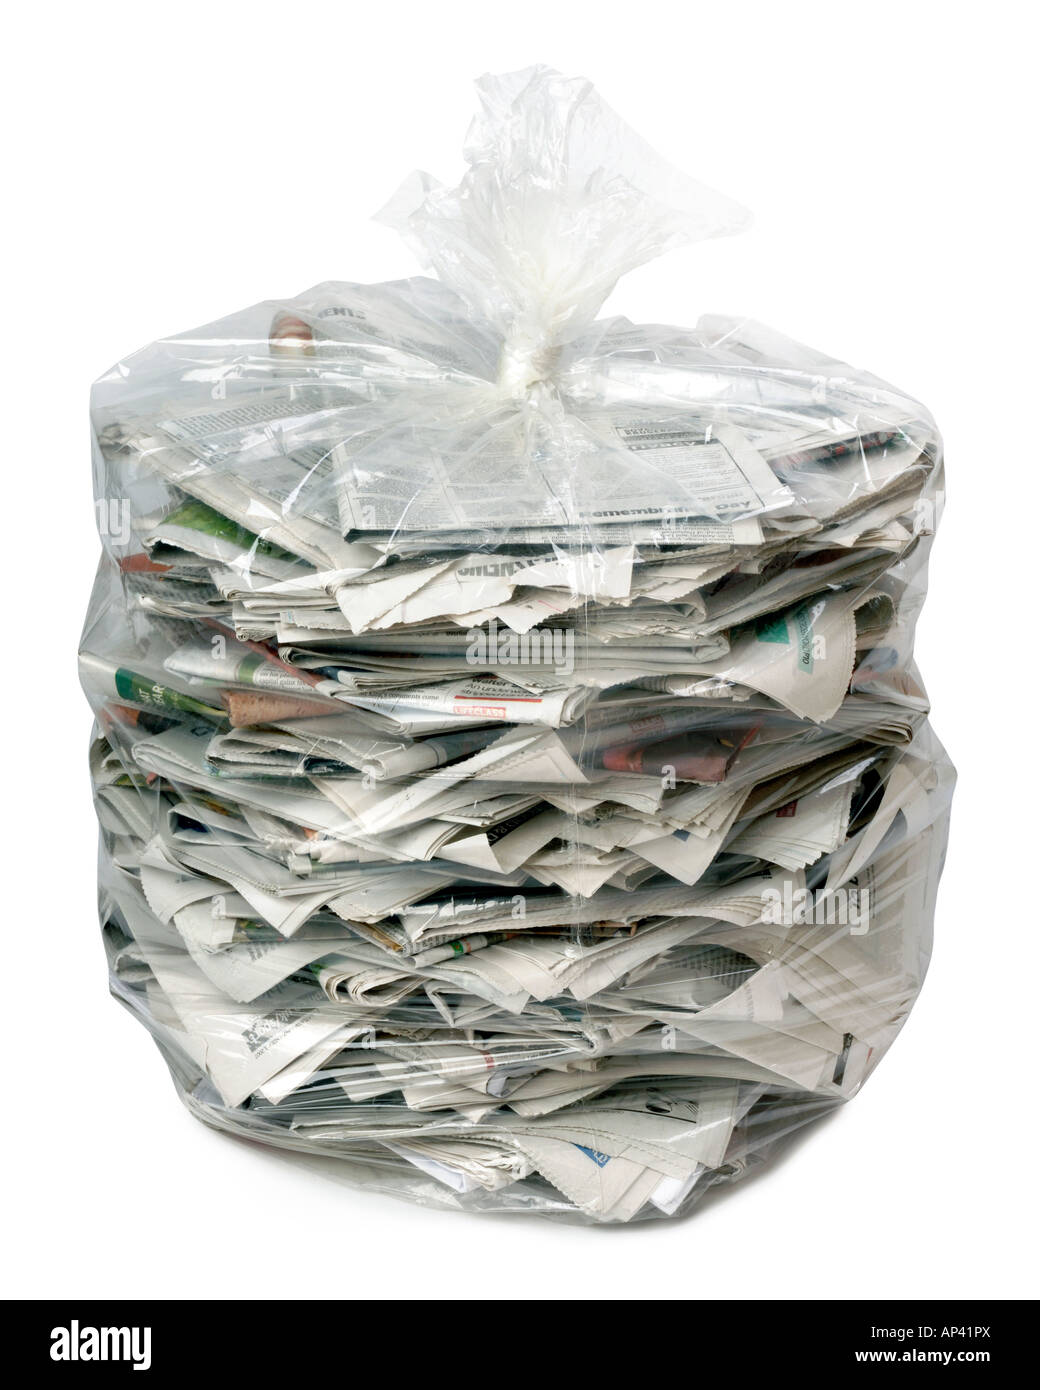 Plastic bag of recycle paper Stock Photo